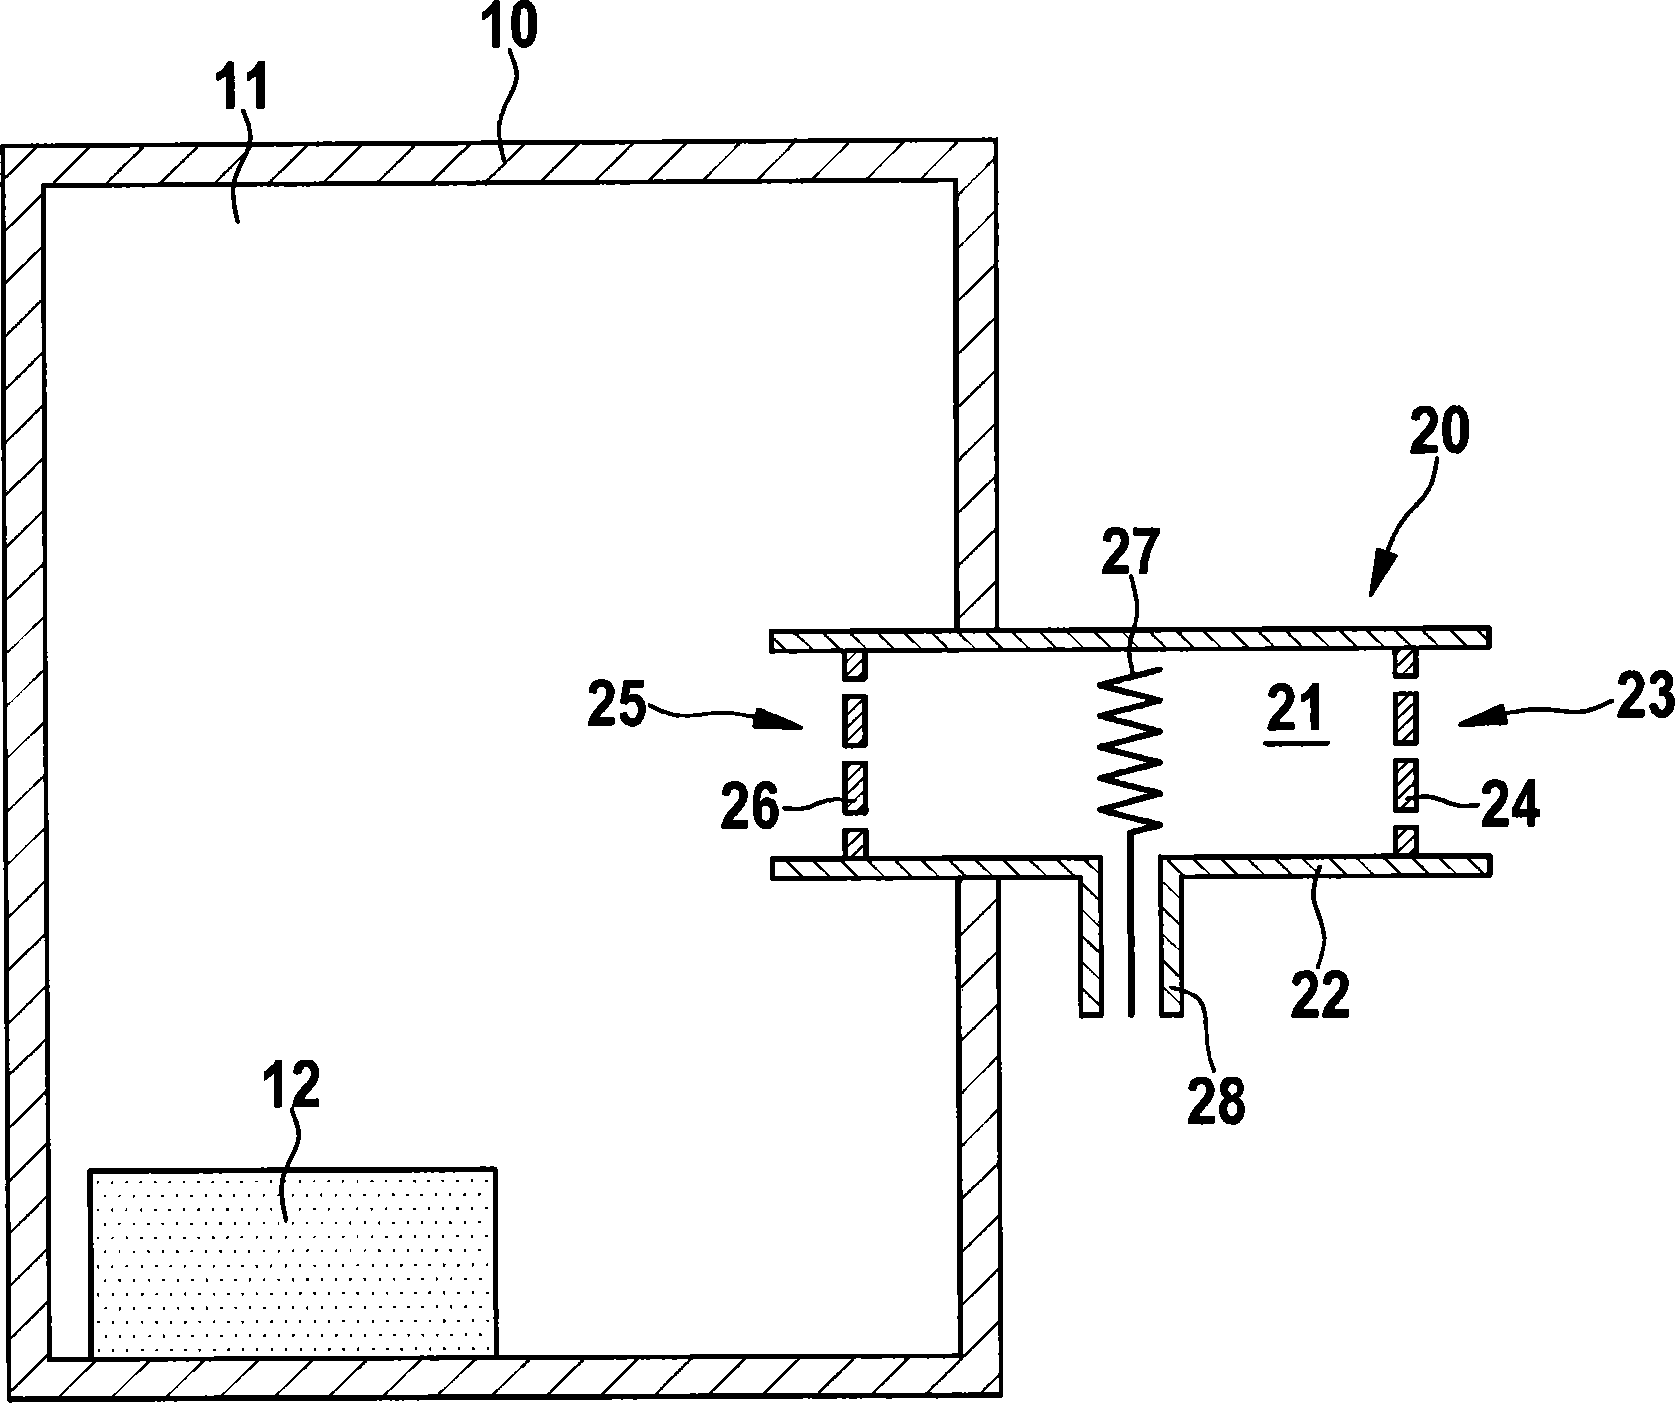 Method and device for reducing the humidity of a gas in a housing interior